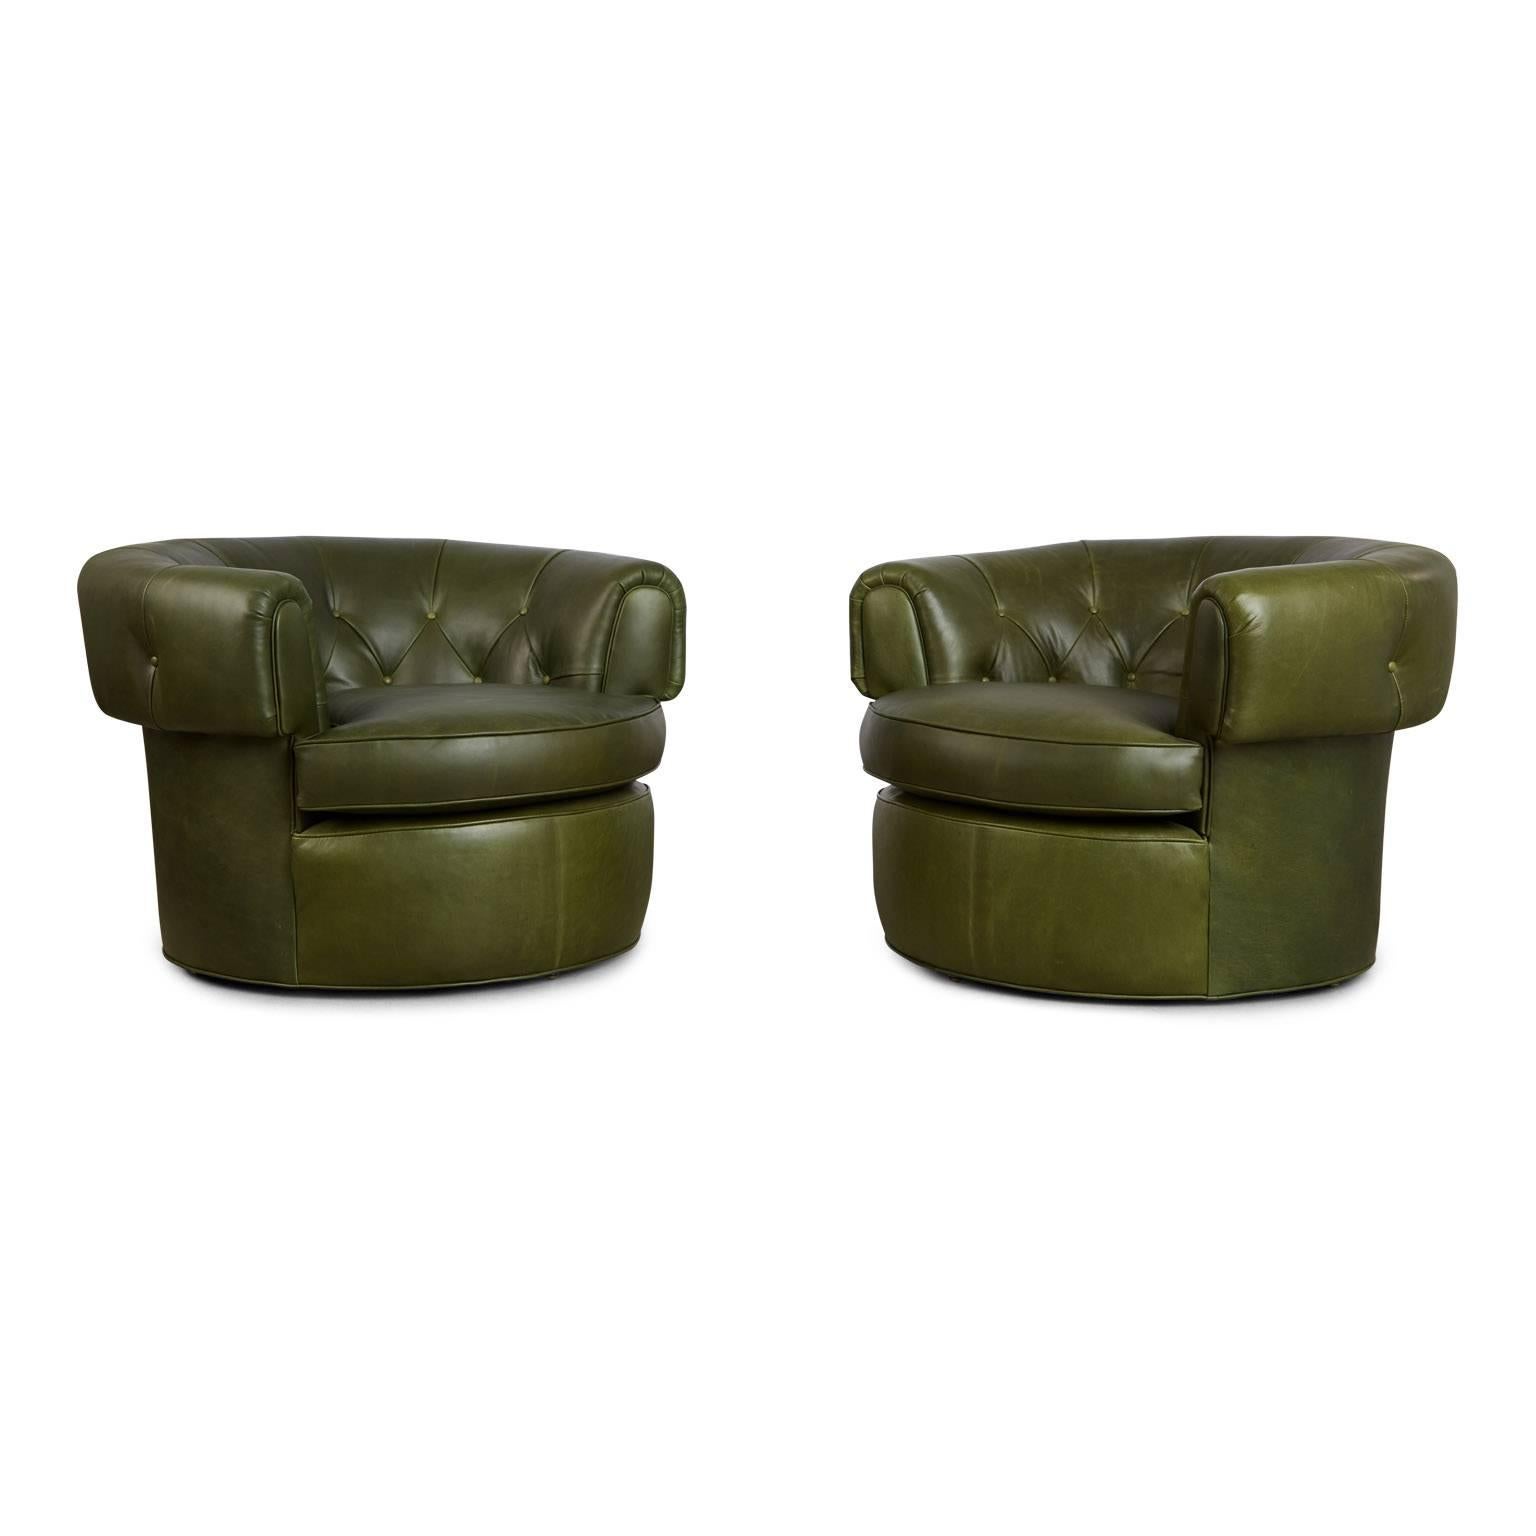 Pair of 1950s Tufted Barrel Chairs in Forest Green Leather, Restored 2